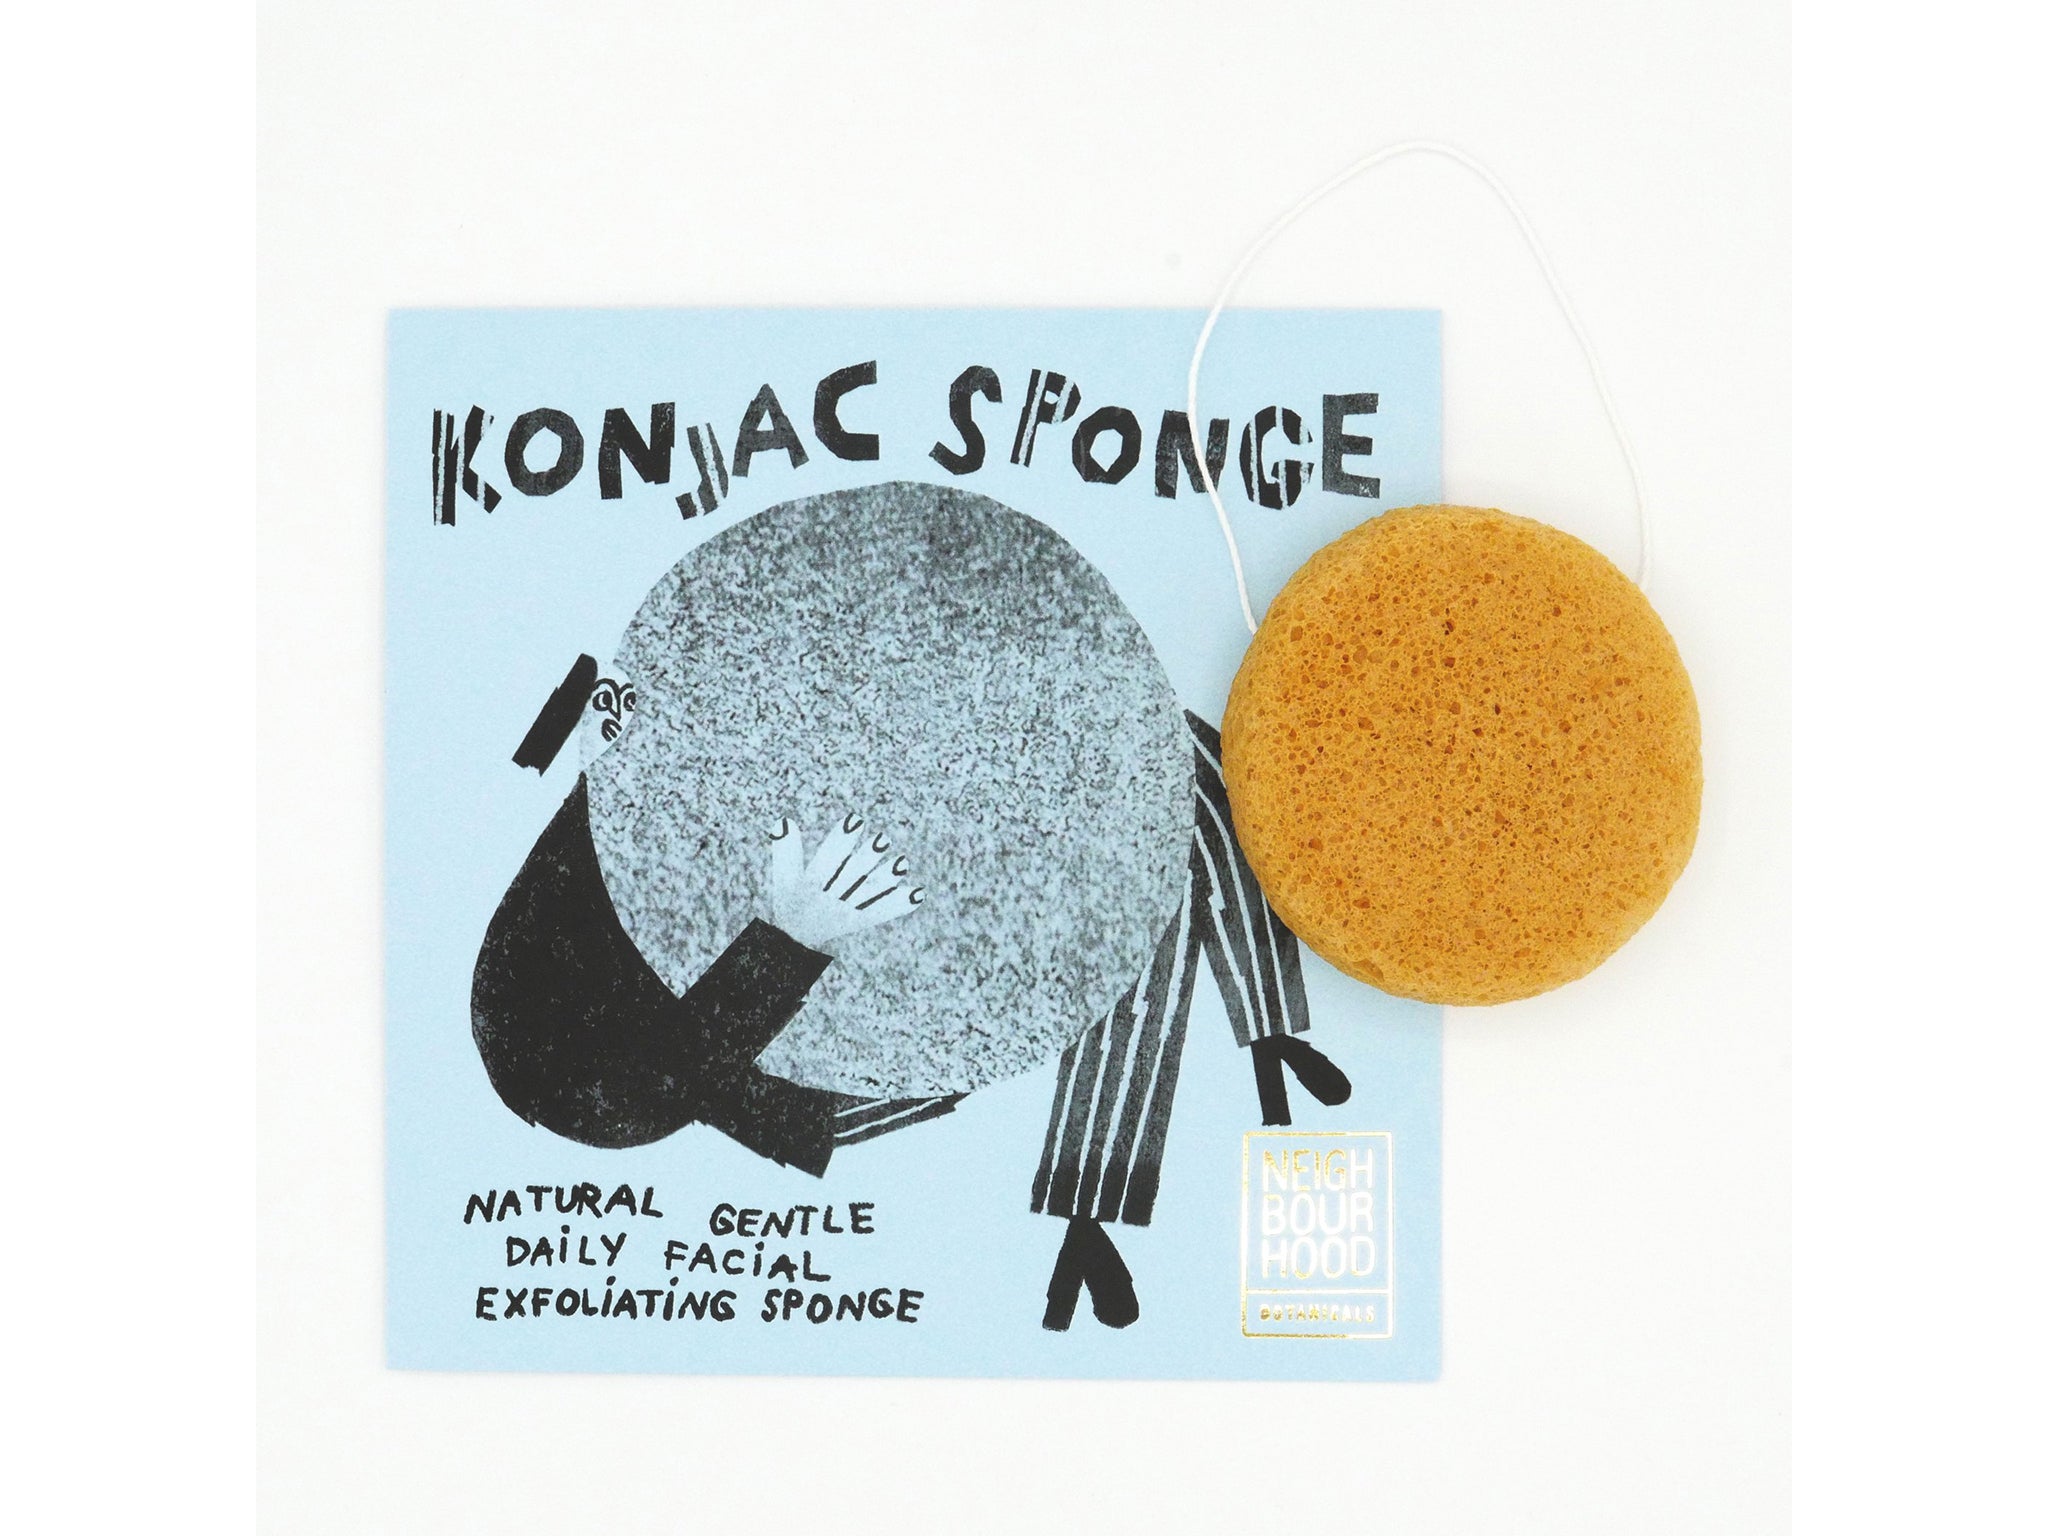 The sponge is made from root vegetable fibres